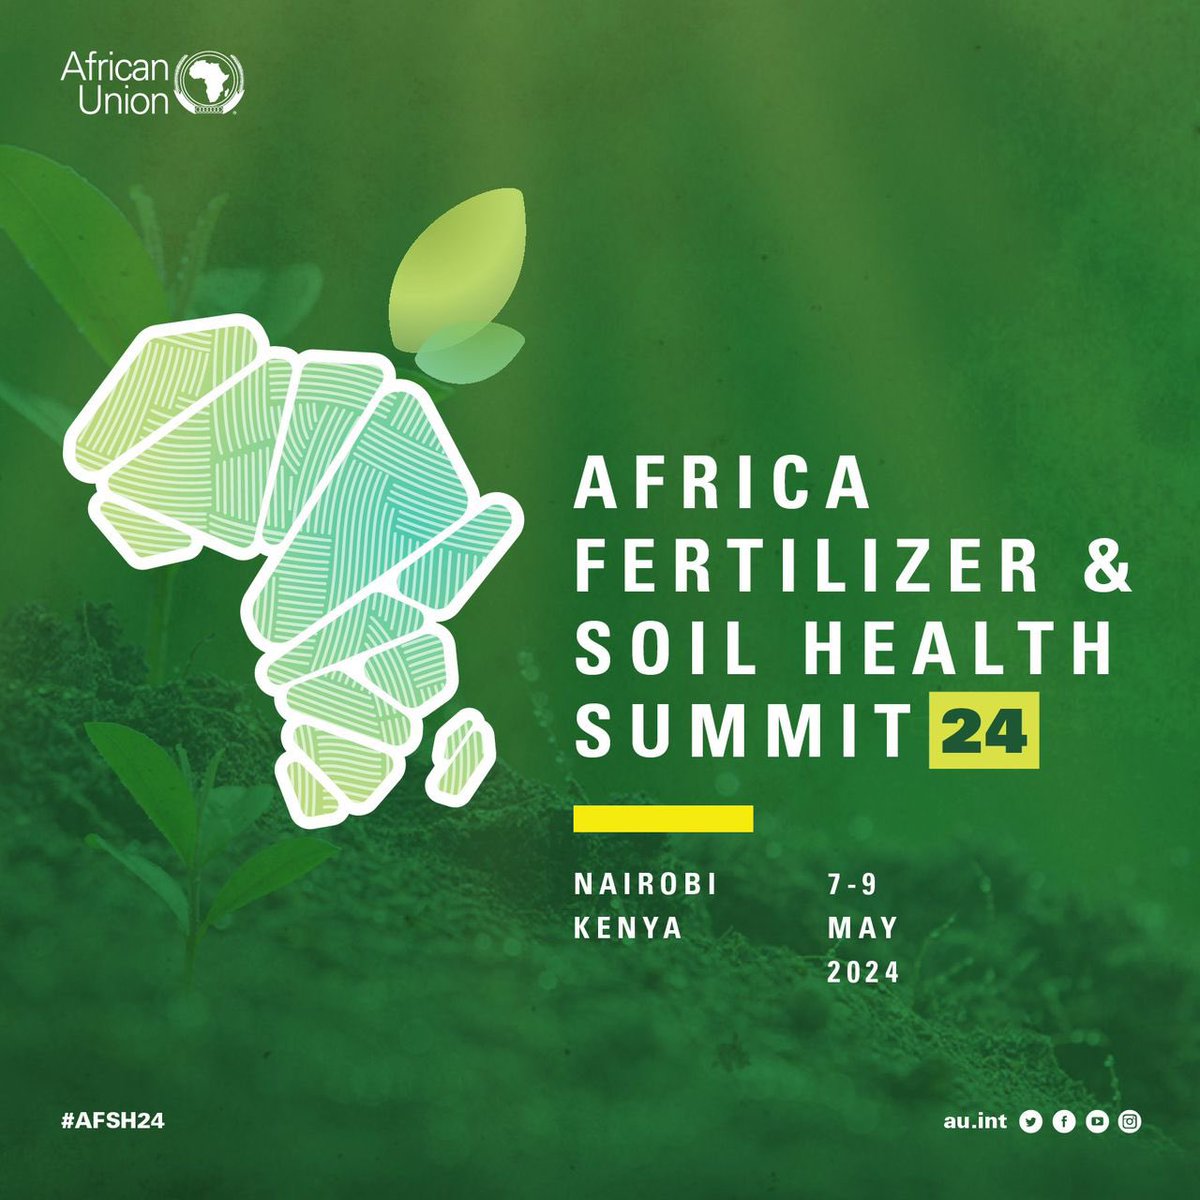 In recent years, there has been an increase in the utilization of African mineral resources for fertilizer production. However, majority of this production is exported which motivates rethinking of long-term investments in fertilizer production plants and blending facilities.…